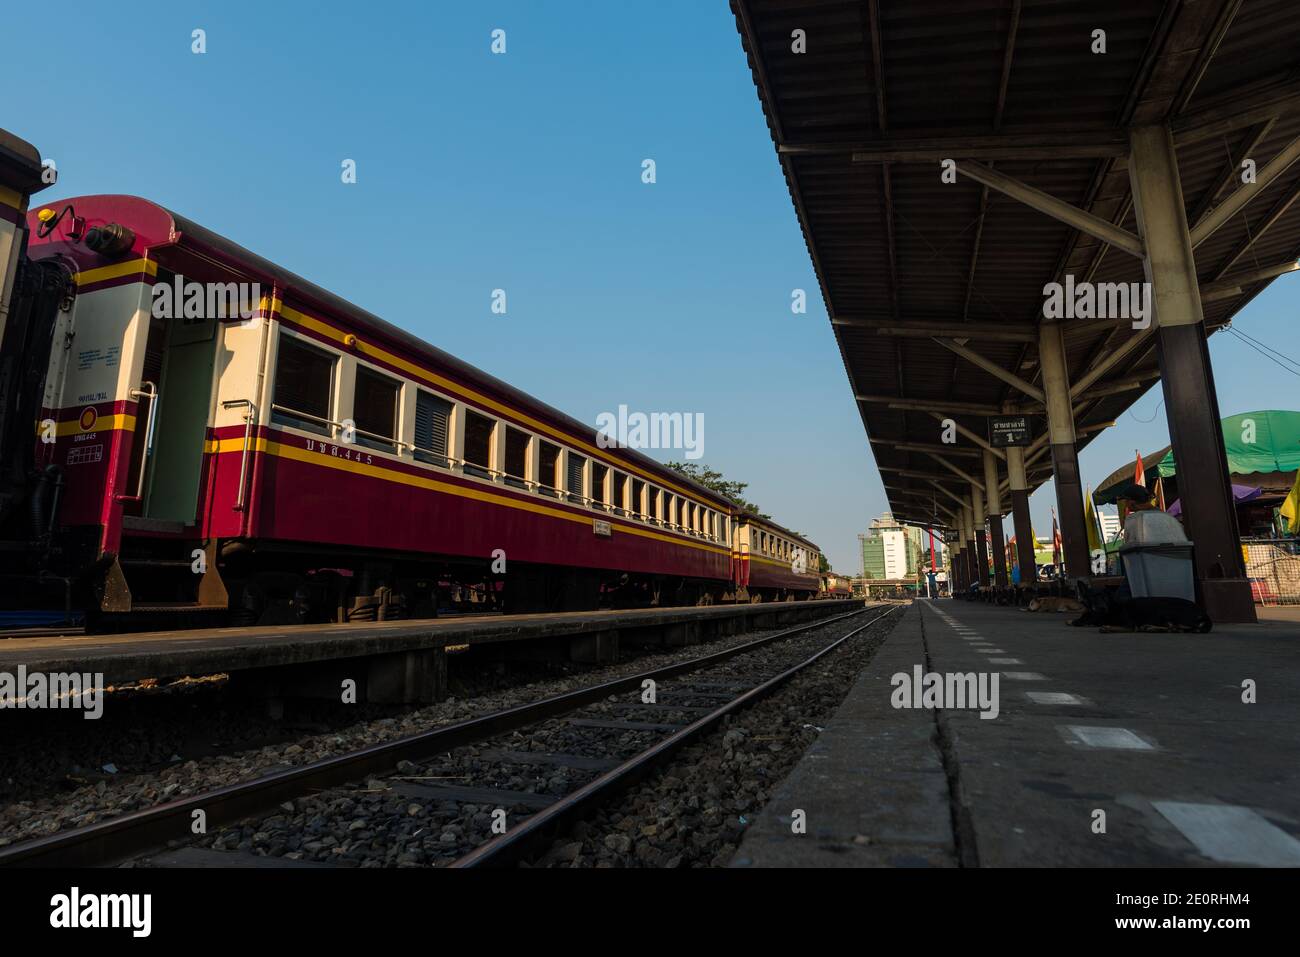 Train wagons at rest in the station of Thonburi, Bangkok, Thailand Stock Photo